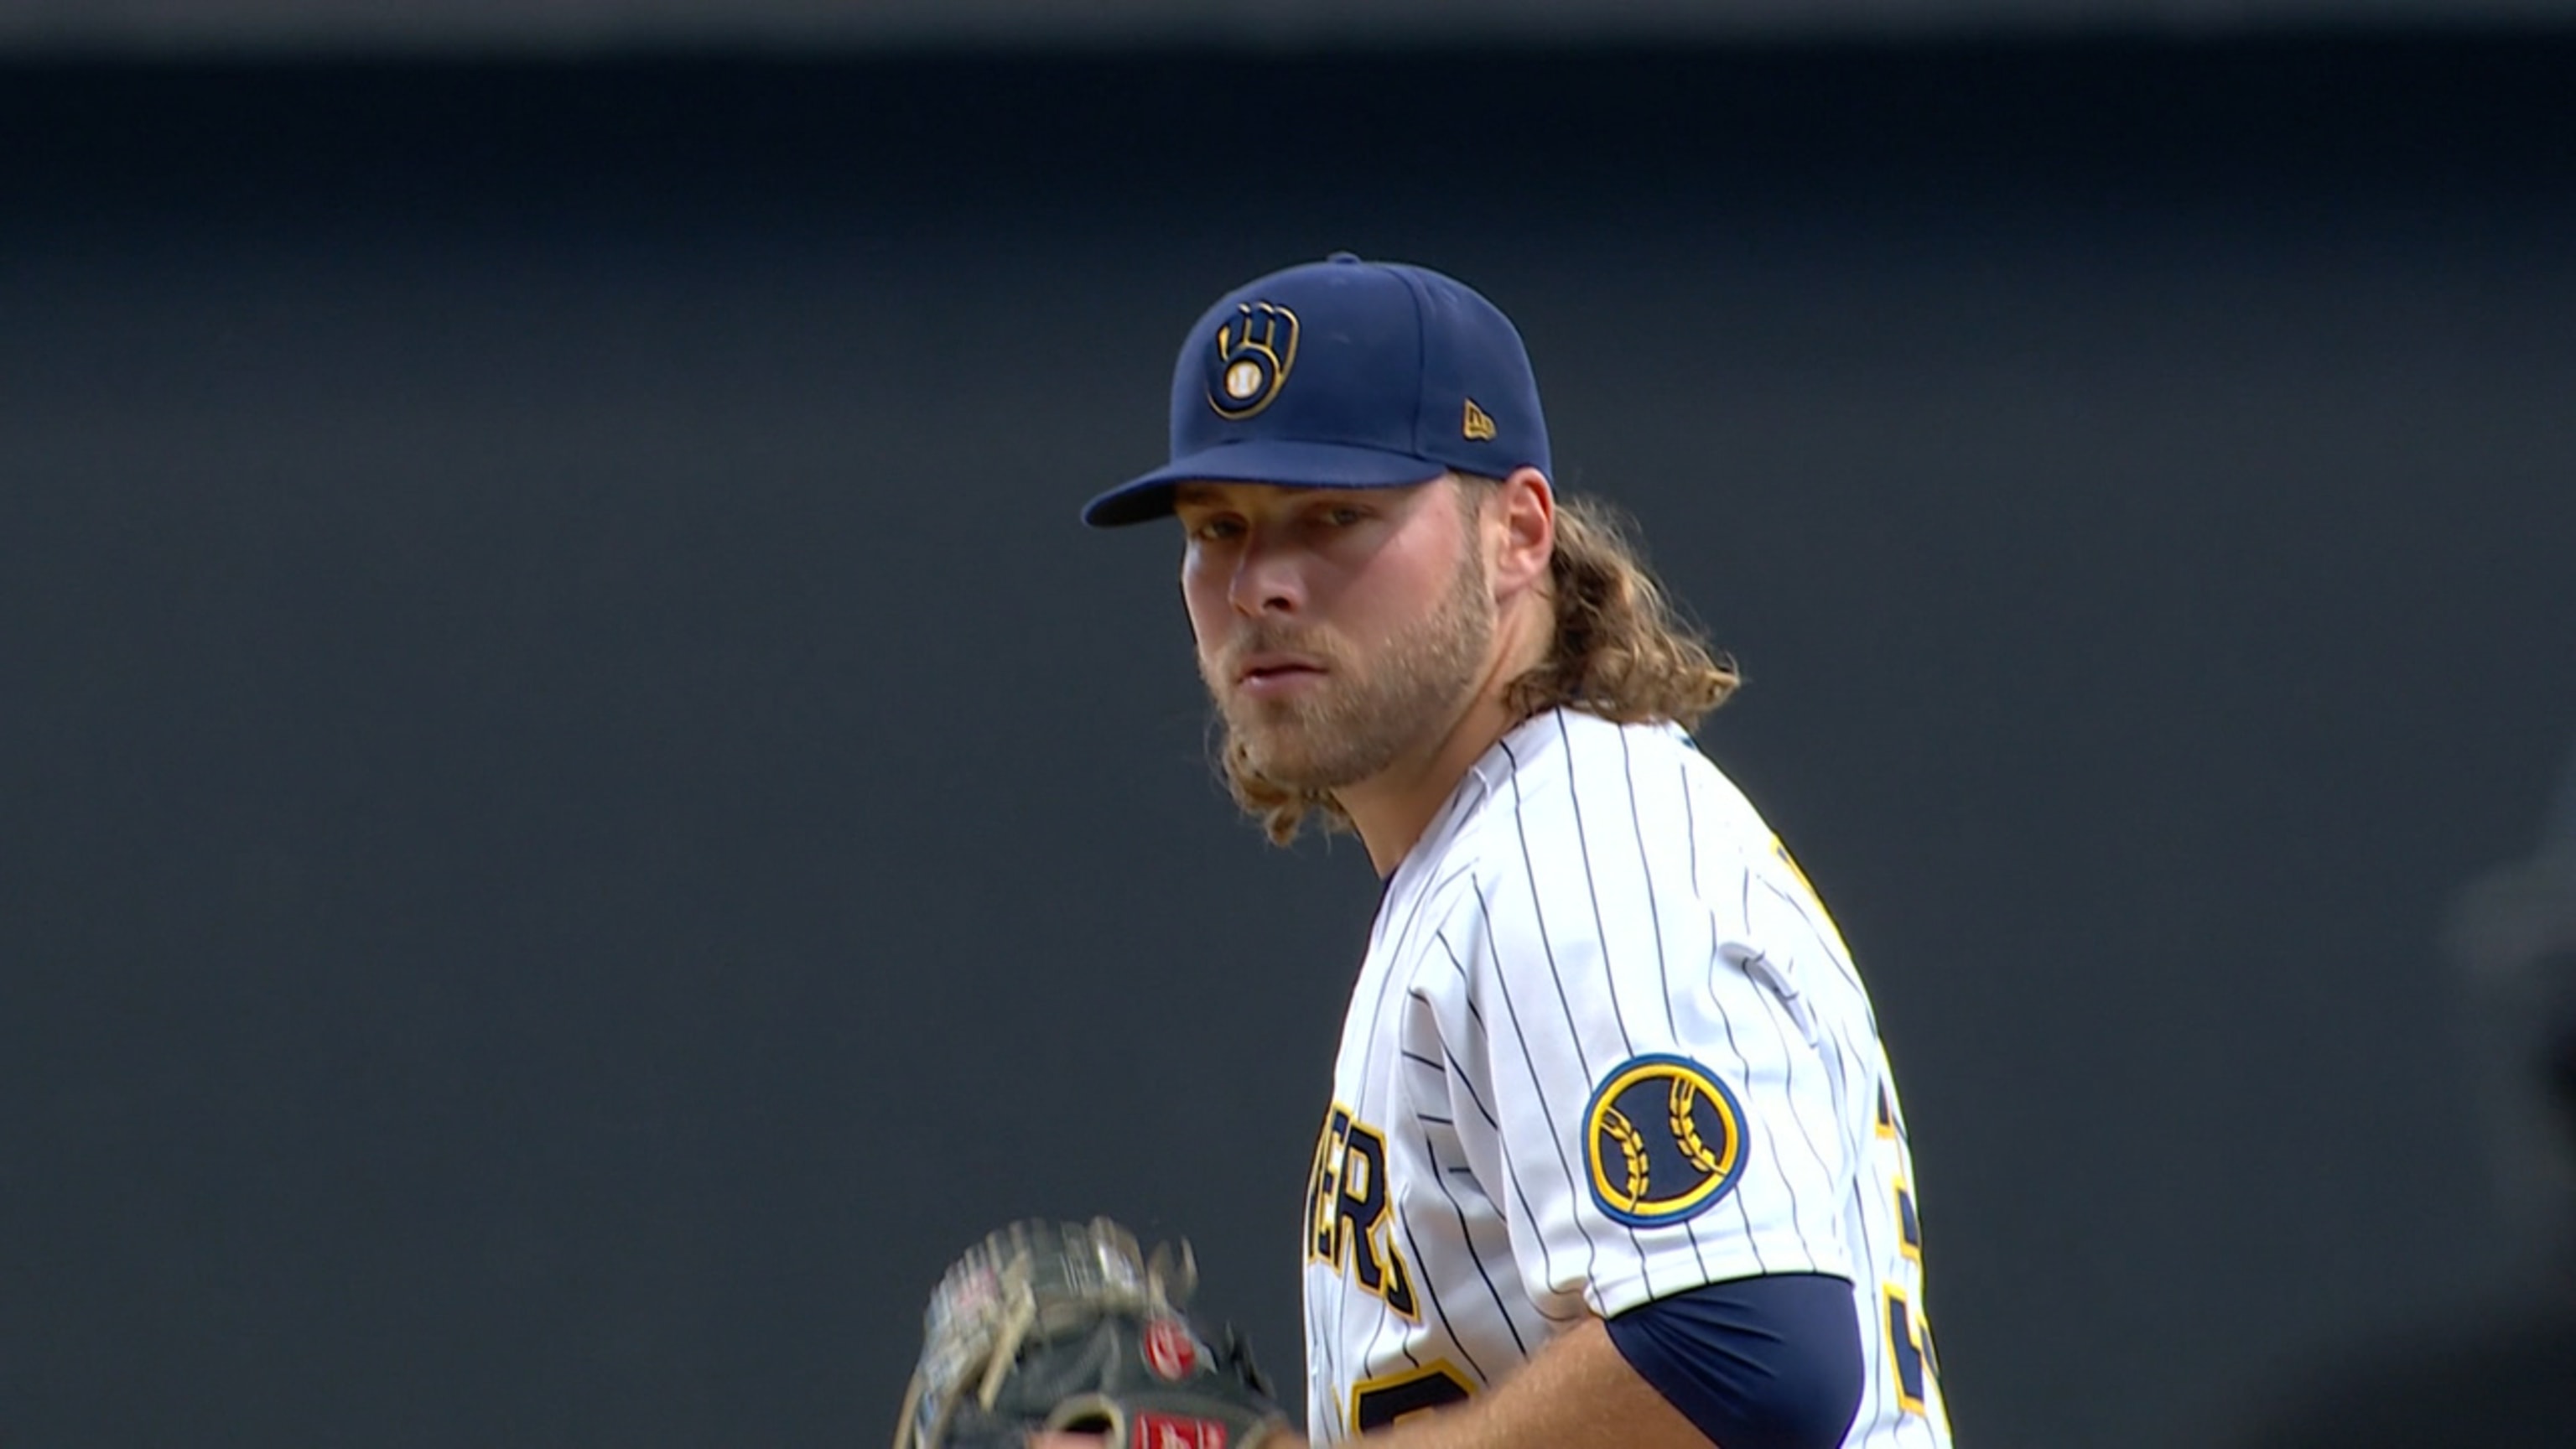 Brewers vs Braves Odds, Picks, & Predictions Today — Burnes Victims